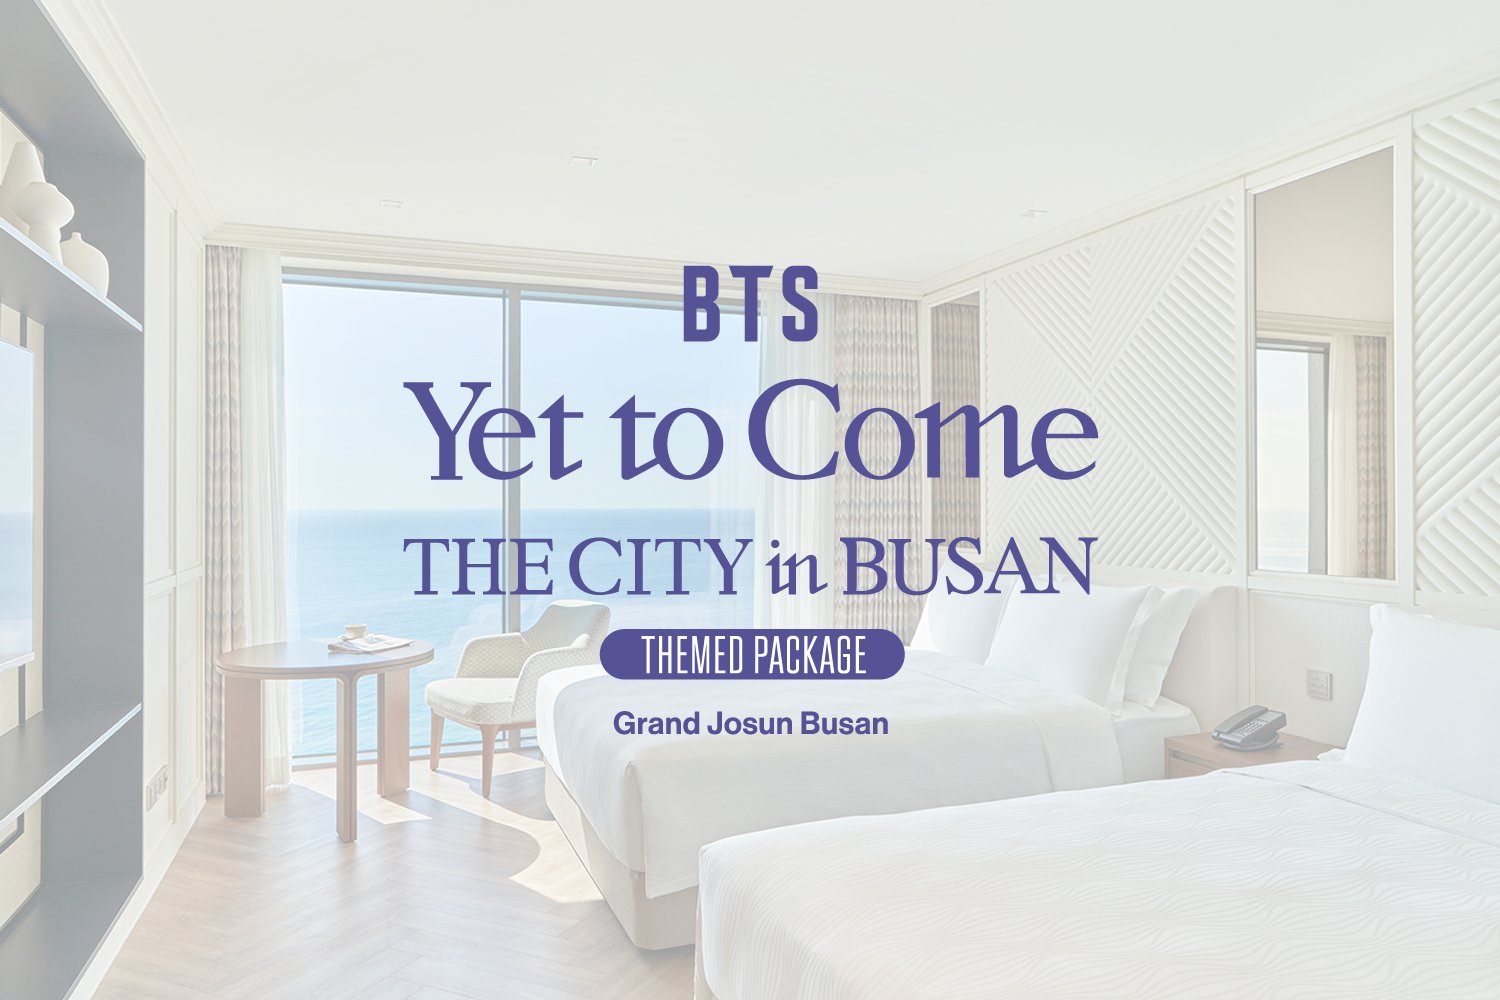 BTS <Yet To Come> THE CITY in BUSAN